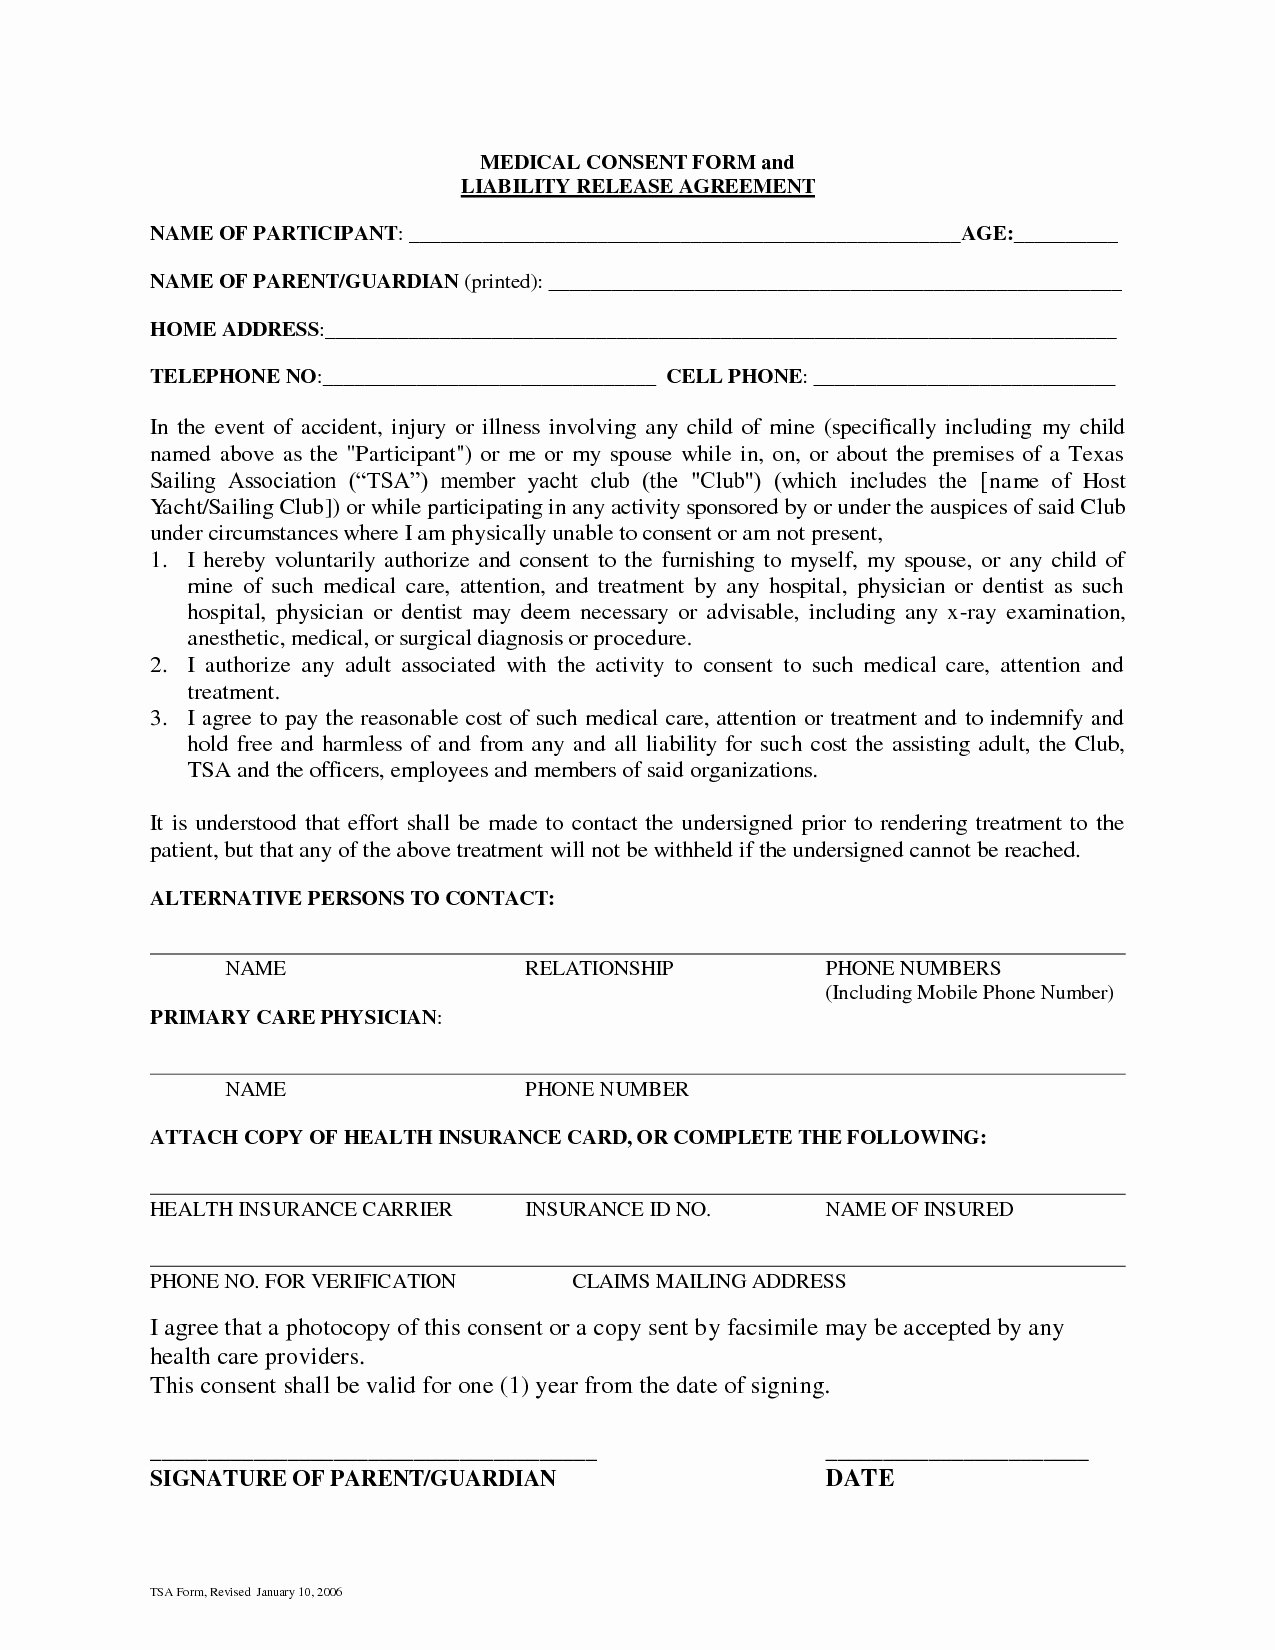 Medical Record Release form Template